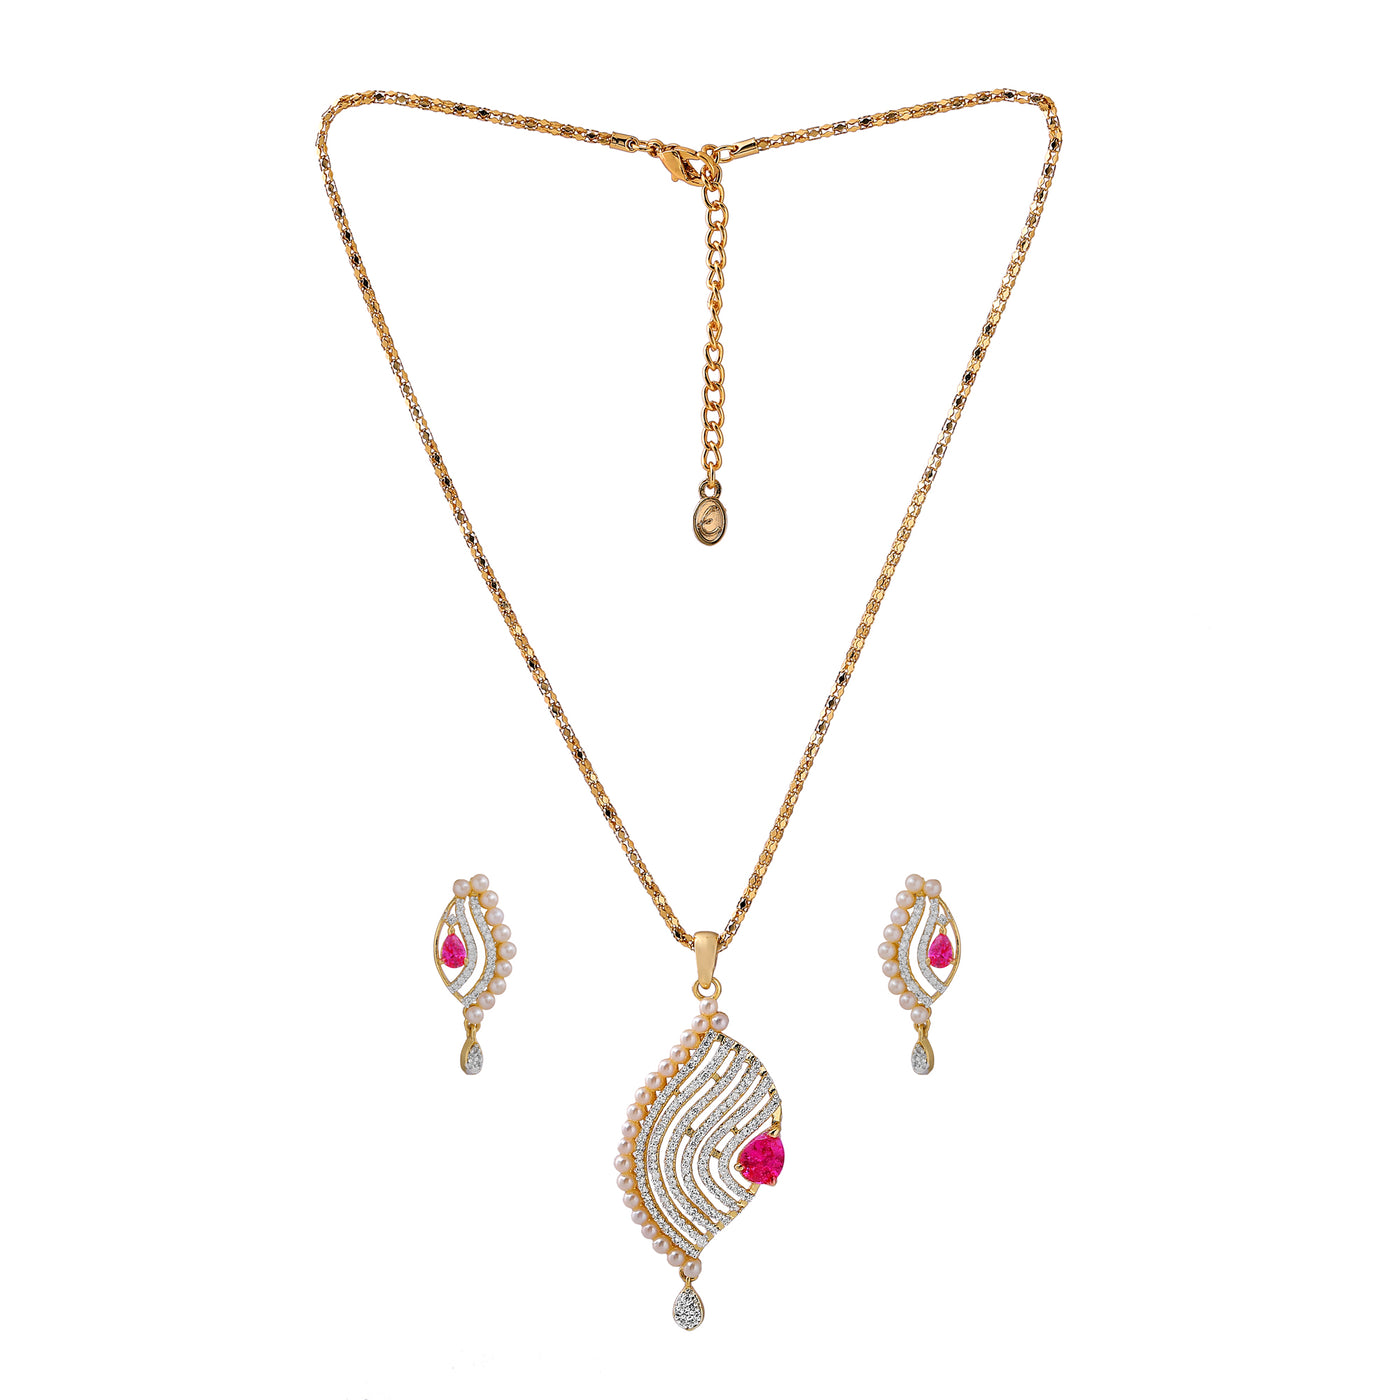 Estele - 24 KT Gold plated Pendant Set with Austrian Crystals and Ruby stones